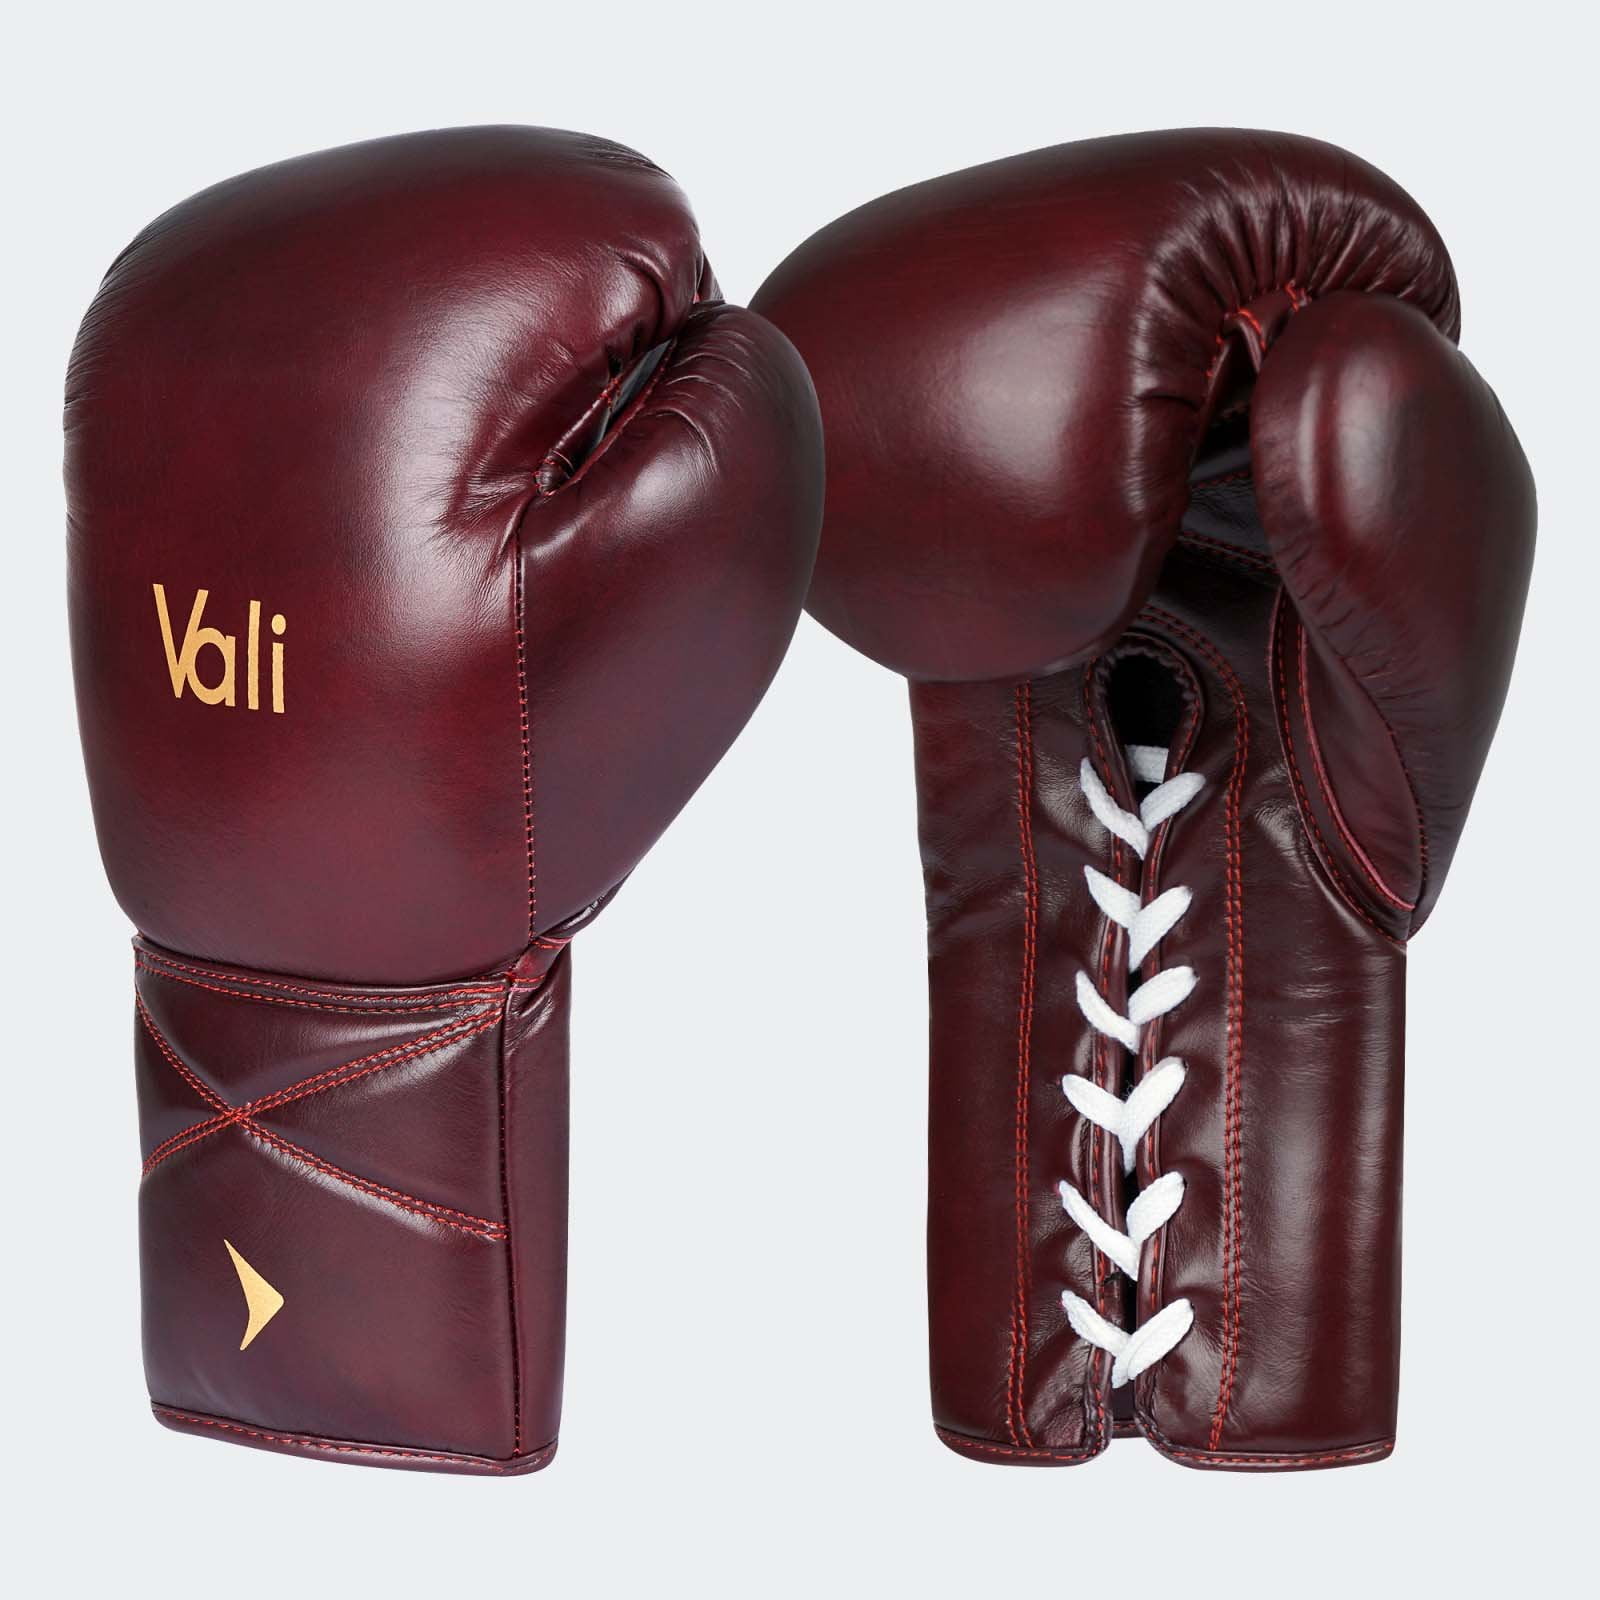 Brand New Design Boxing Gloves 14OZ With Laces Excellent Quality Real Leather 